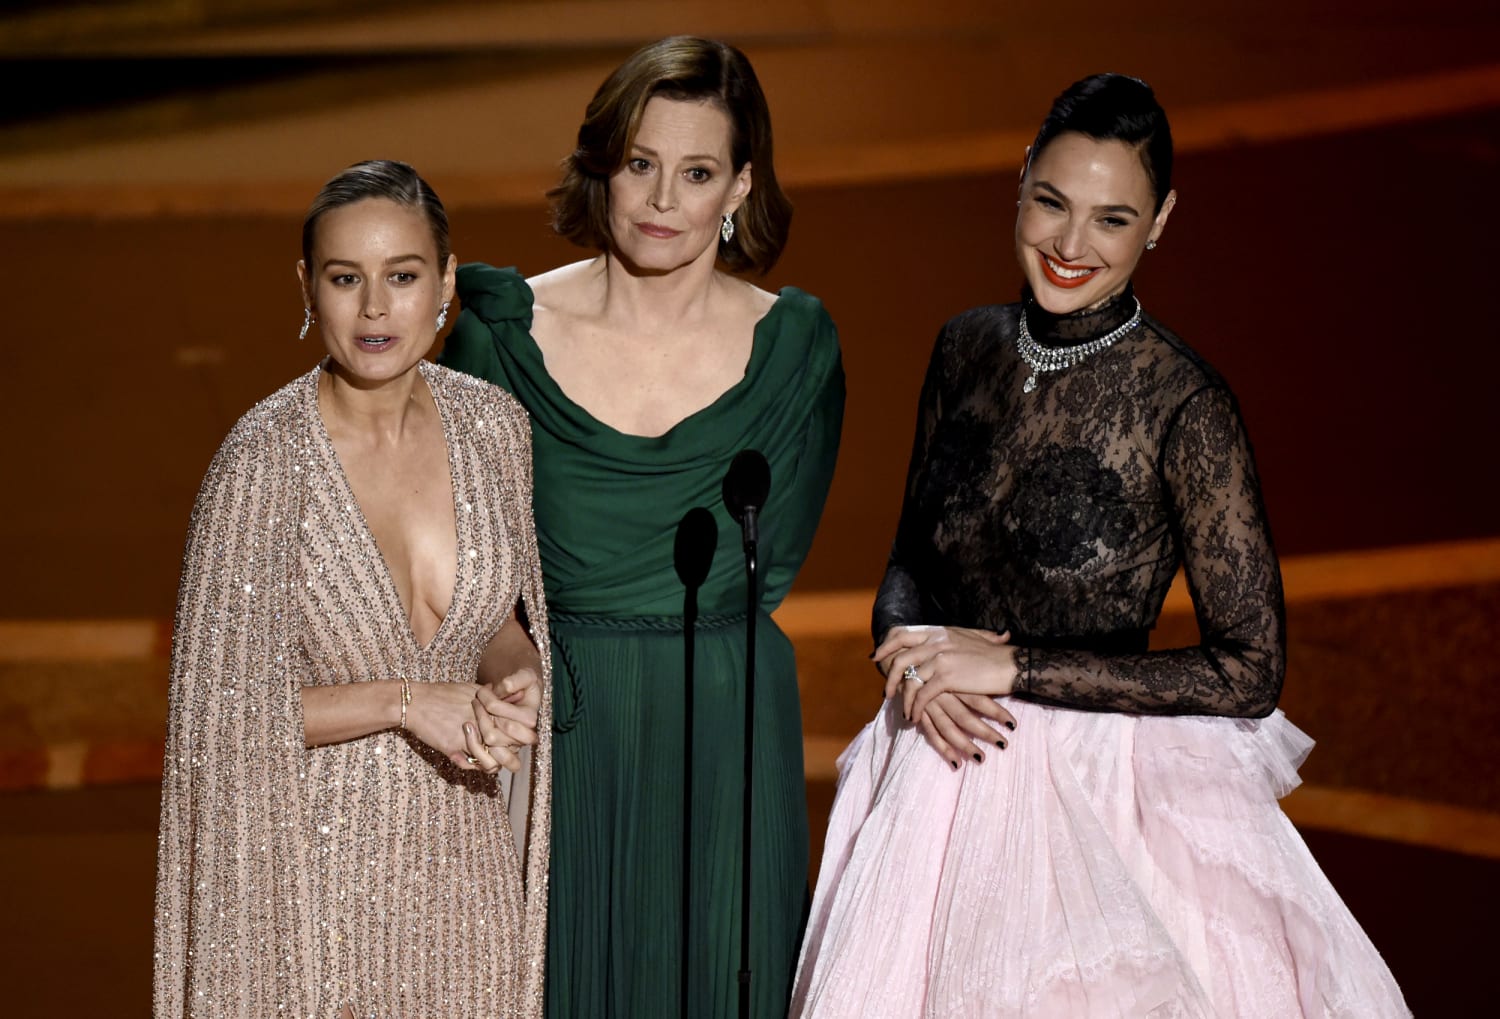 The top-5 moments for women at the Oscars